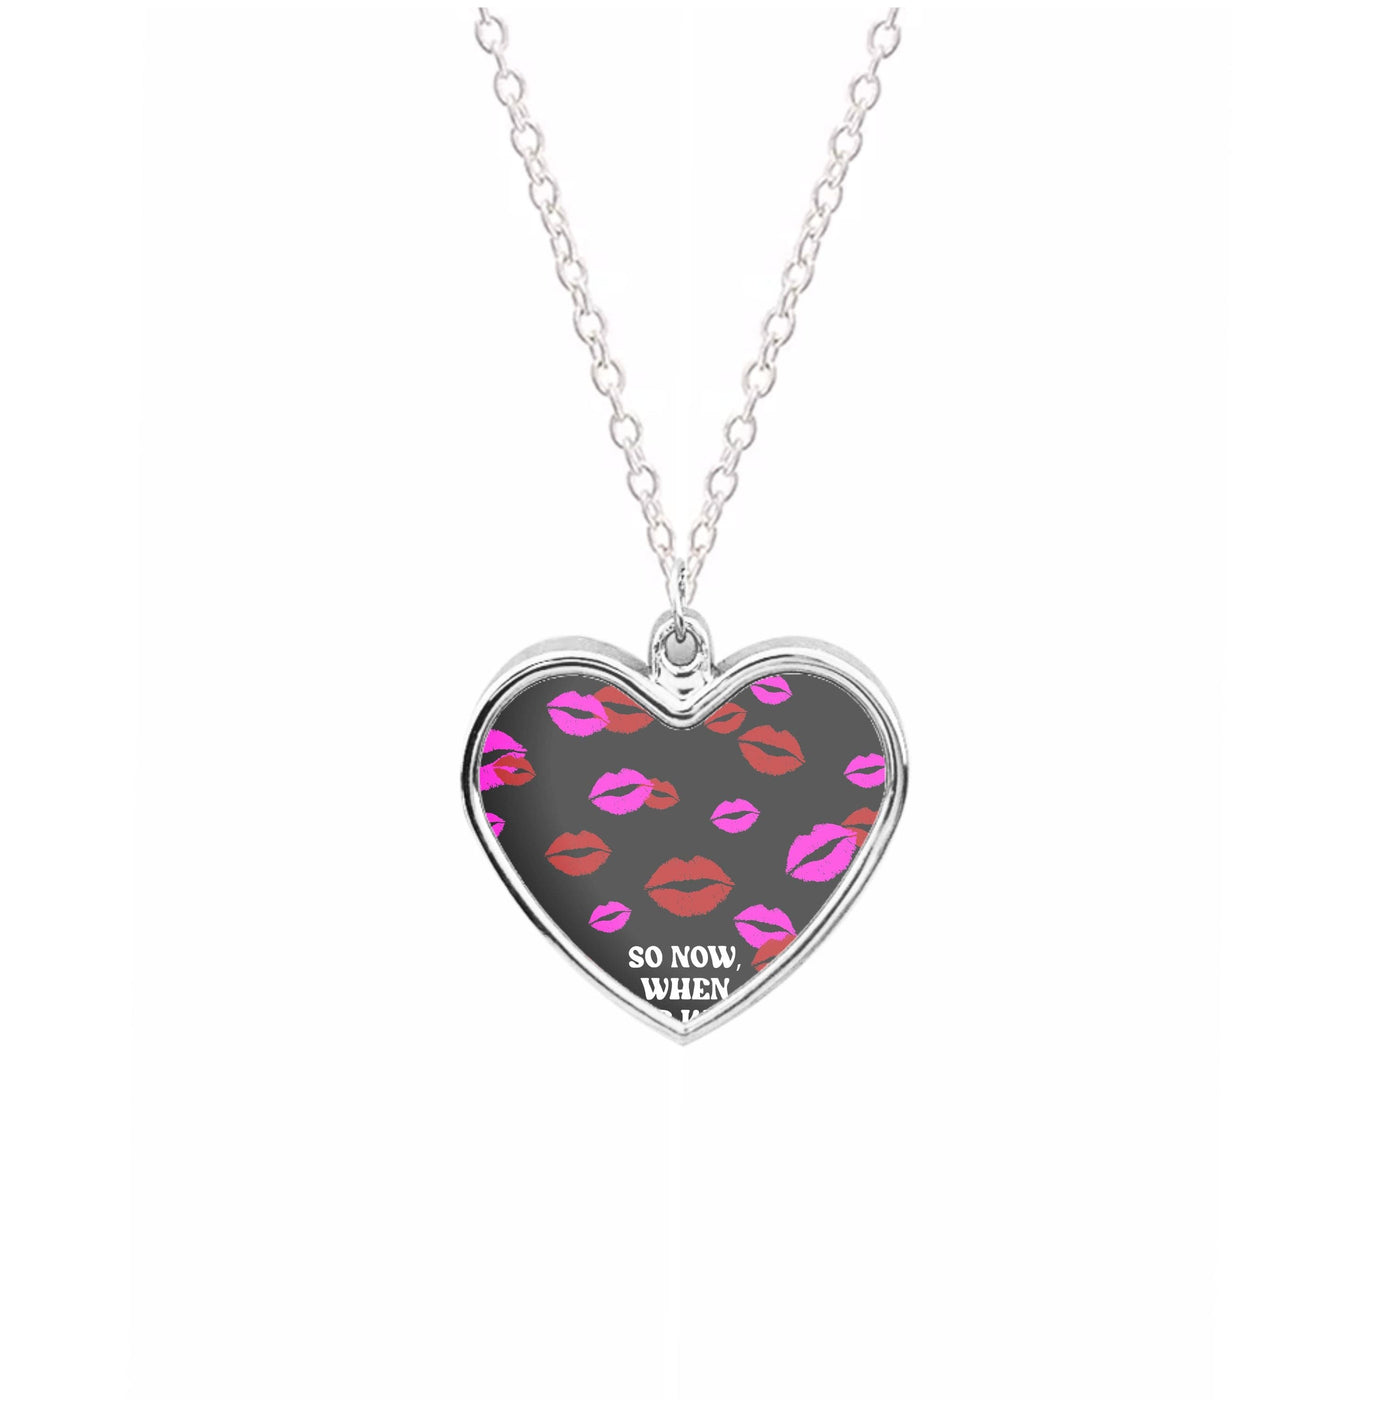 So Now When We Kiss I have Anger Issues - Chappell Roan Necklace